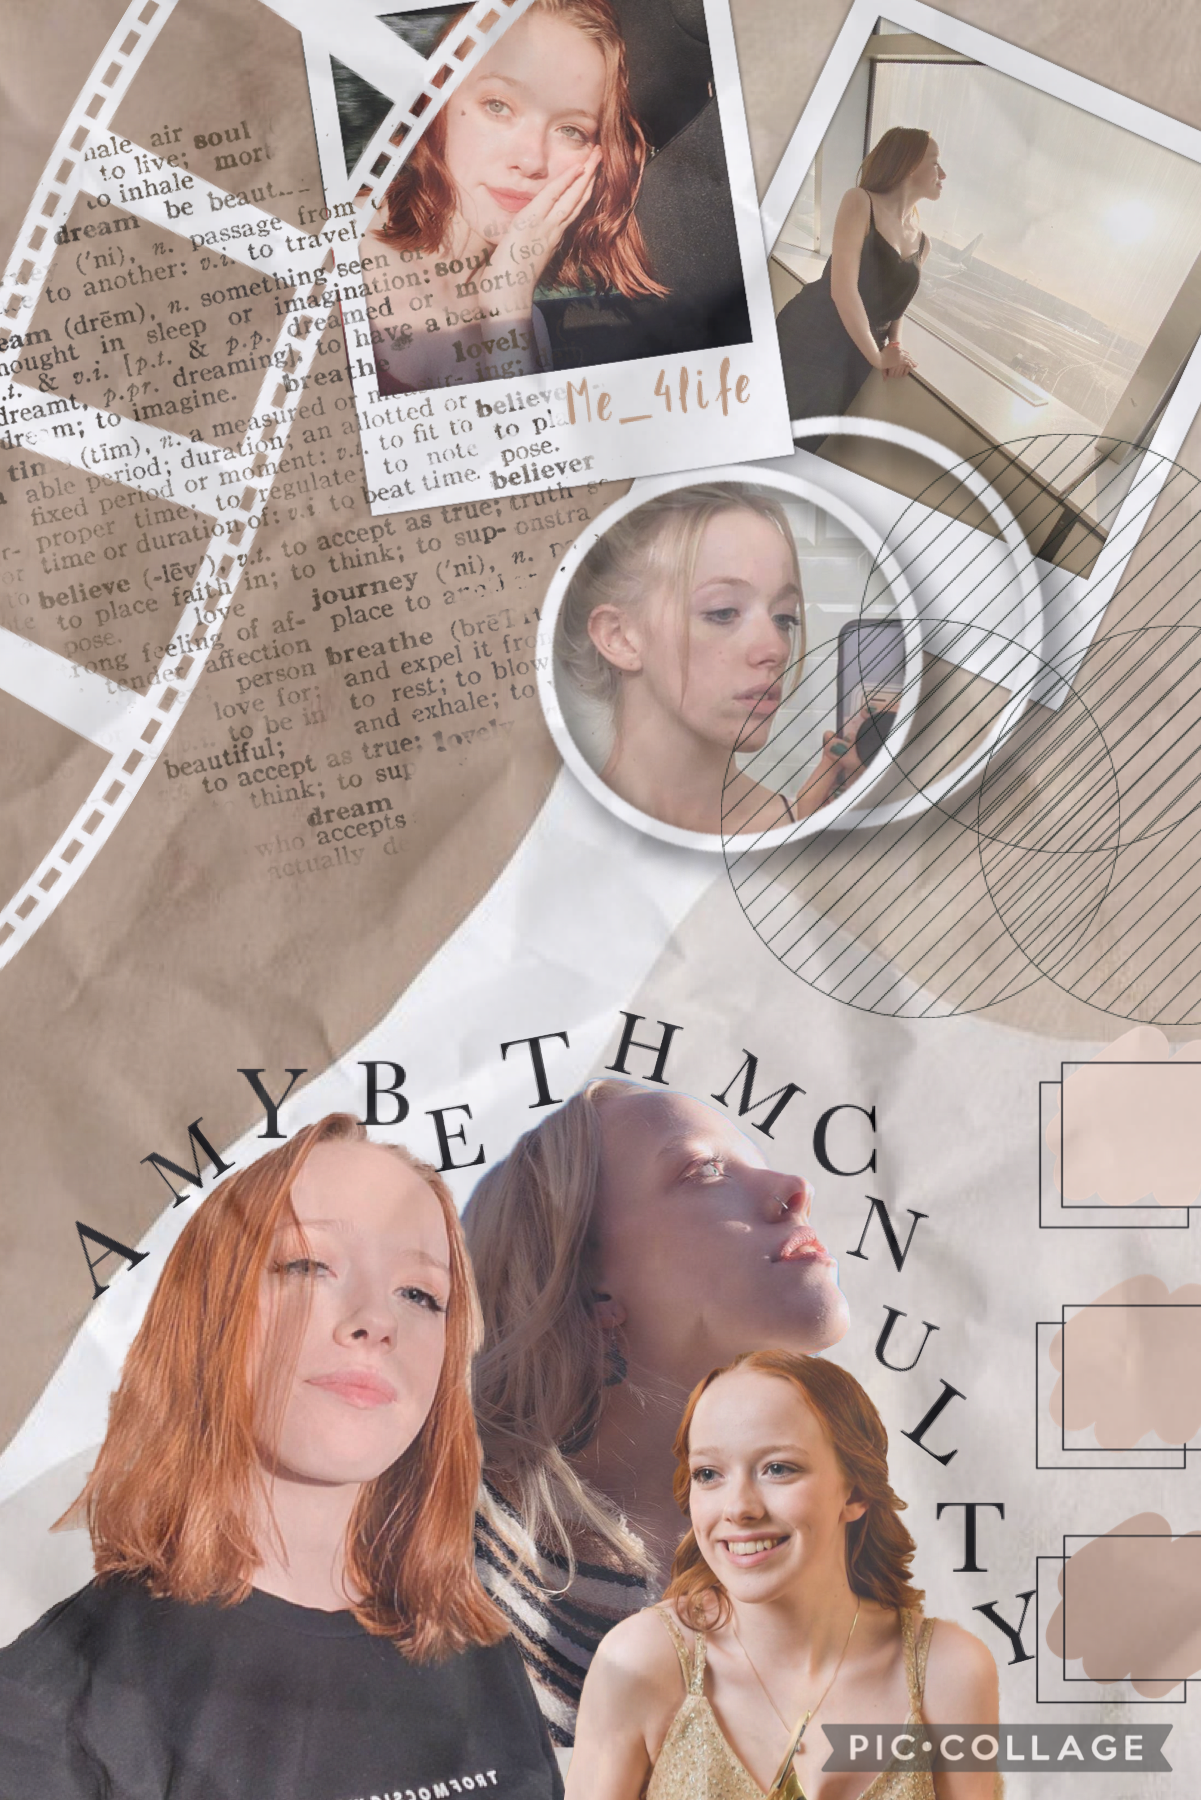 Amybeth McNulty✨
Any celebrity suggestions?